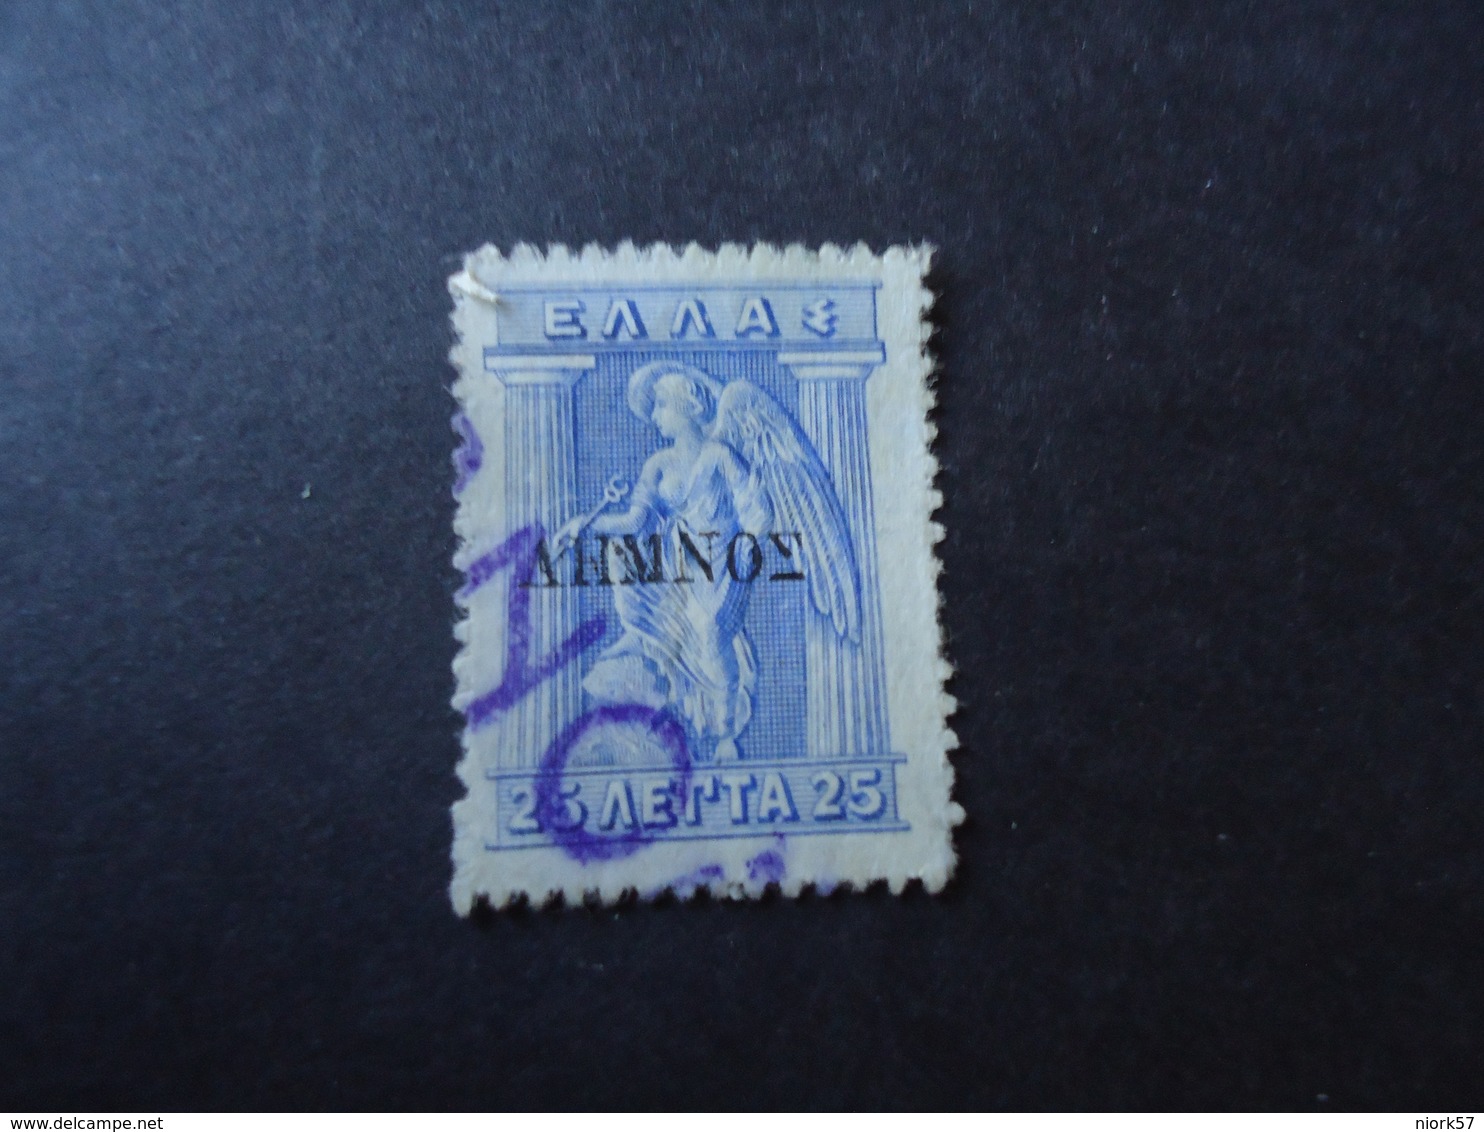 CRETE LEMNOS  GREECE USED STAMPS   WITH POSTMARK  RETHYMNON - Ohne Zuordnung